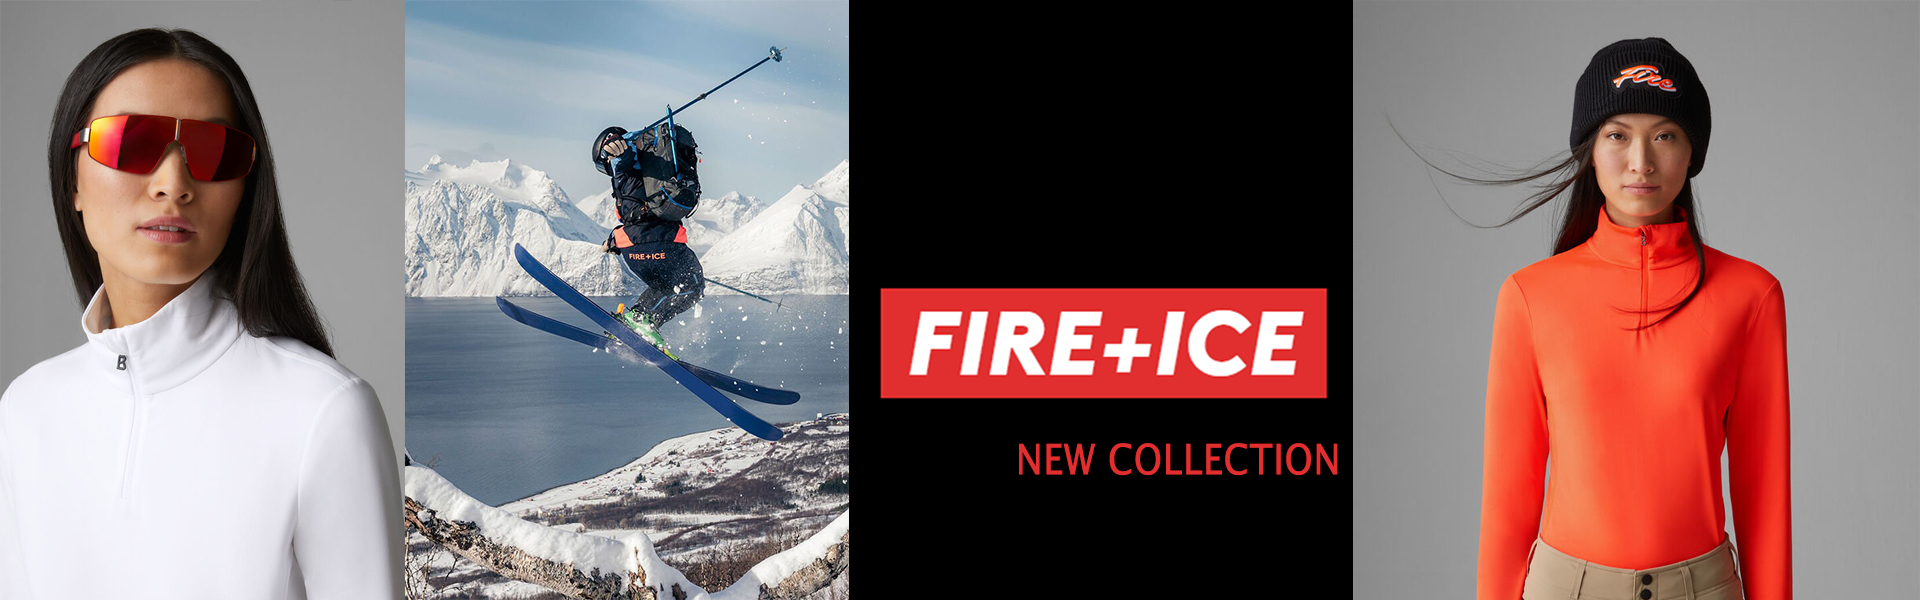 Bogner Fire+ice new collection